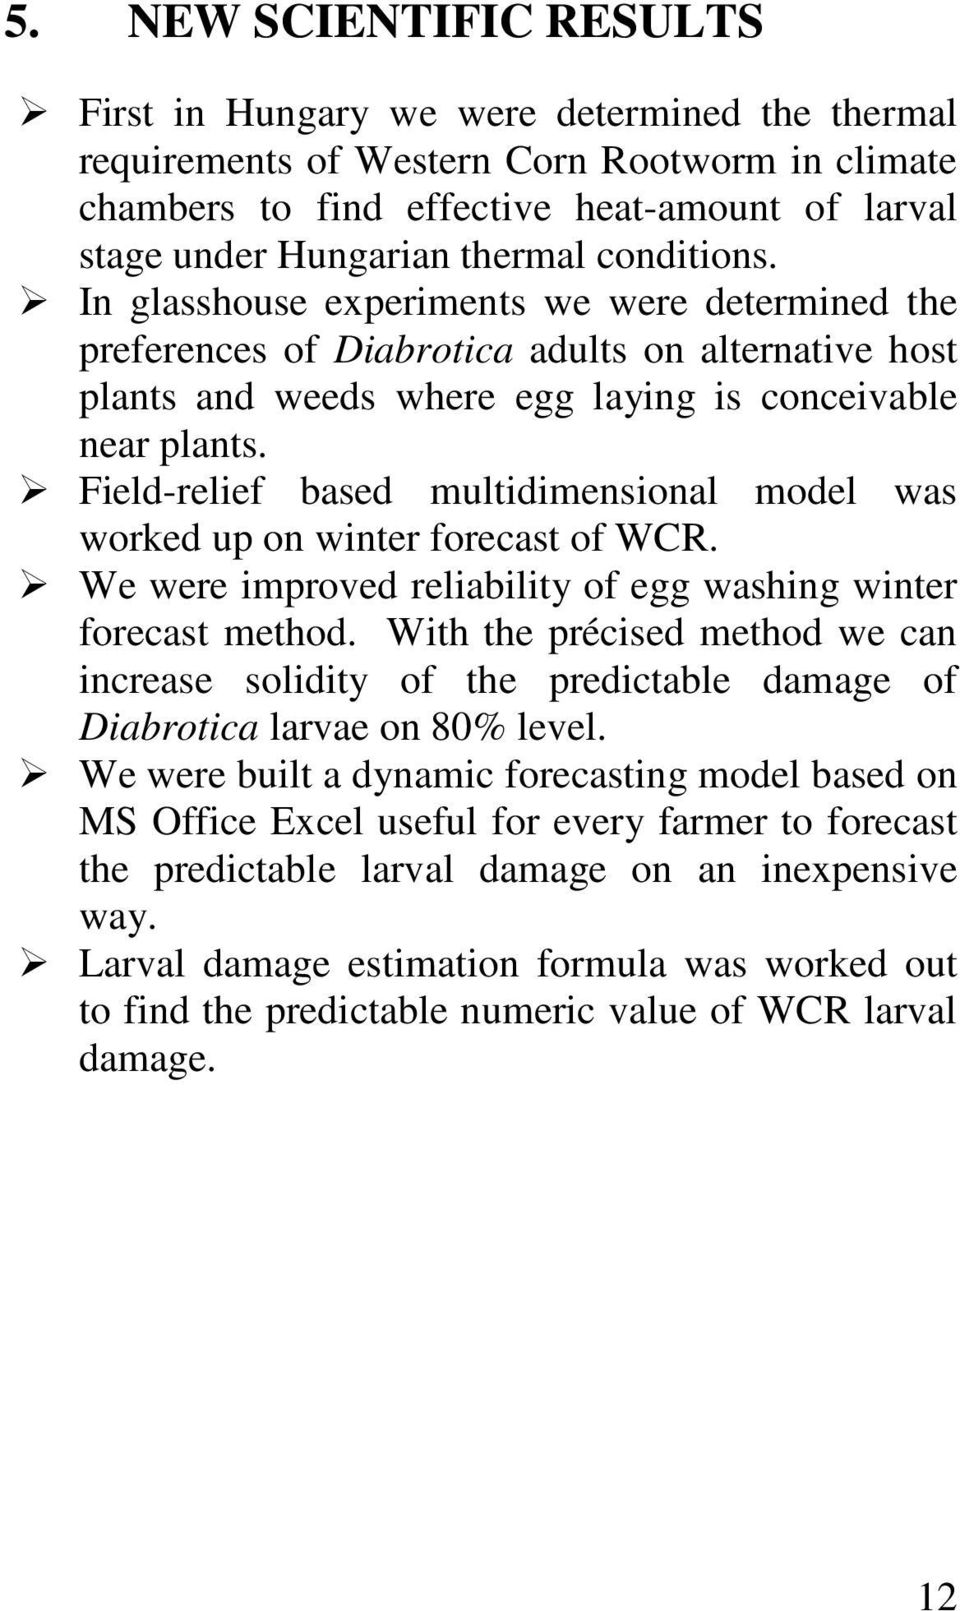 Field-relief based multidimensional model was worked up on winter forecast of WCR. We were improved reliability of egg washing winter forecast method.